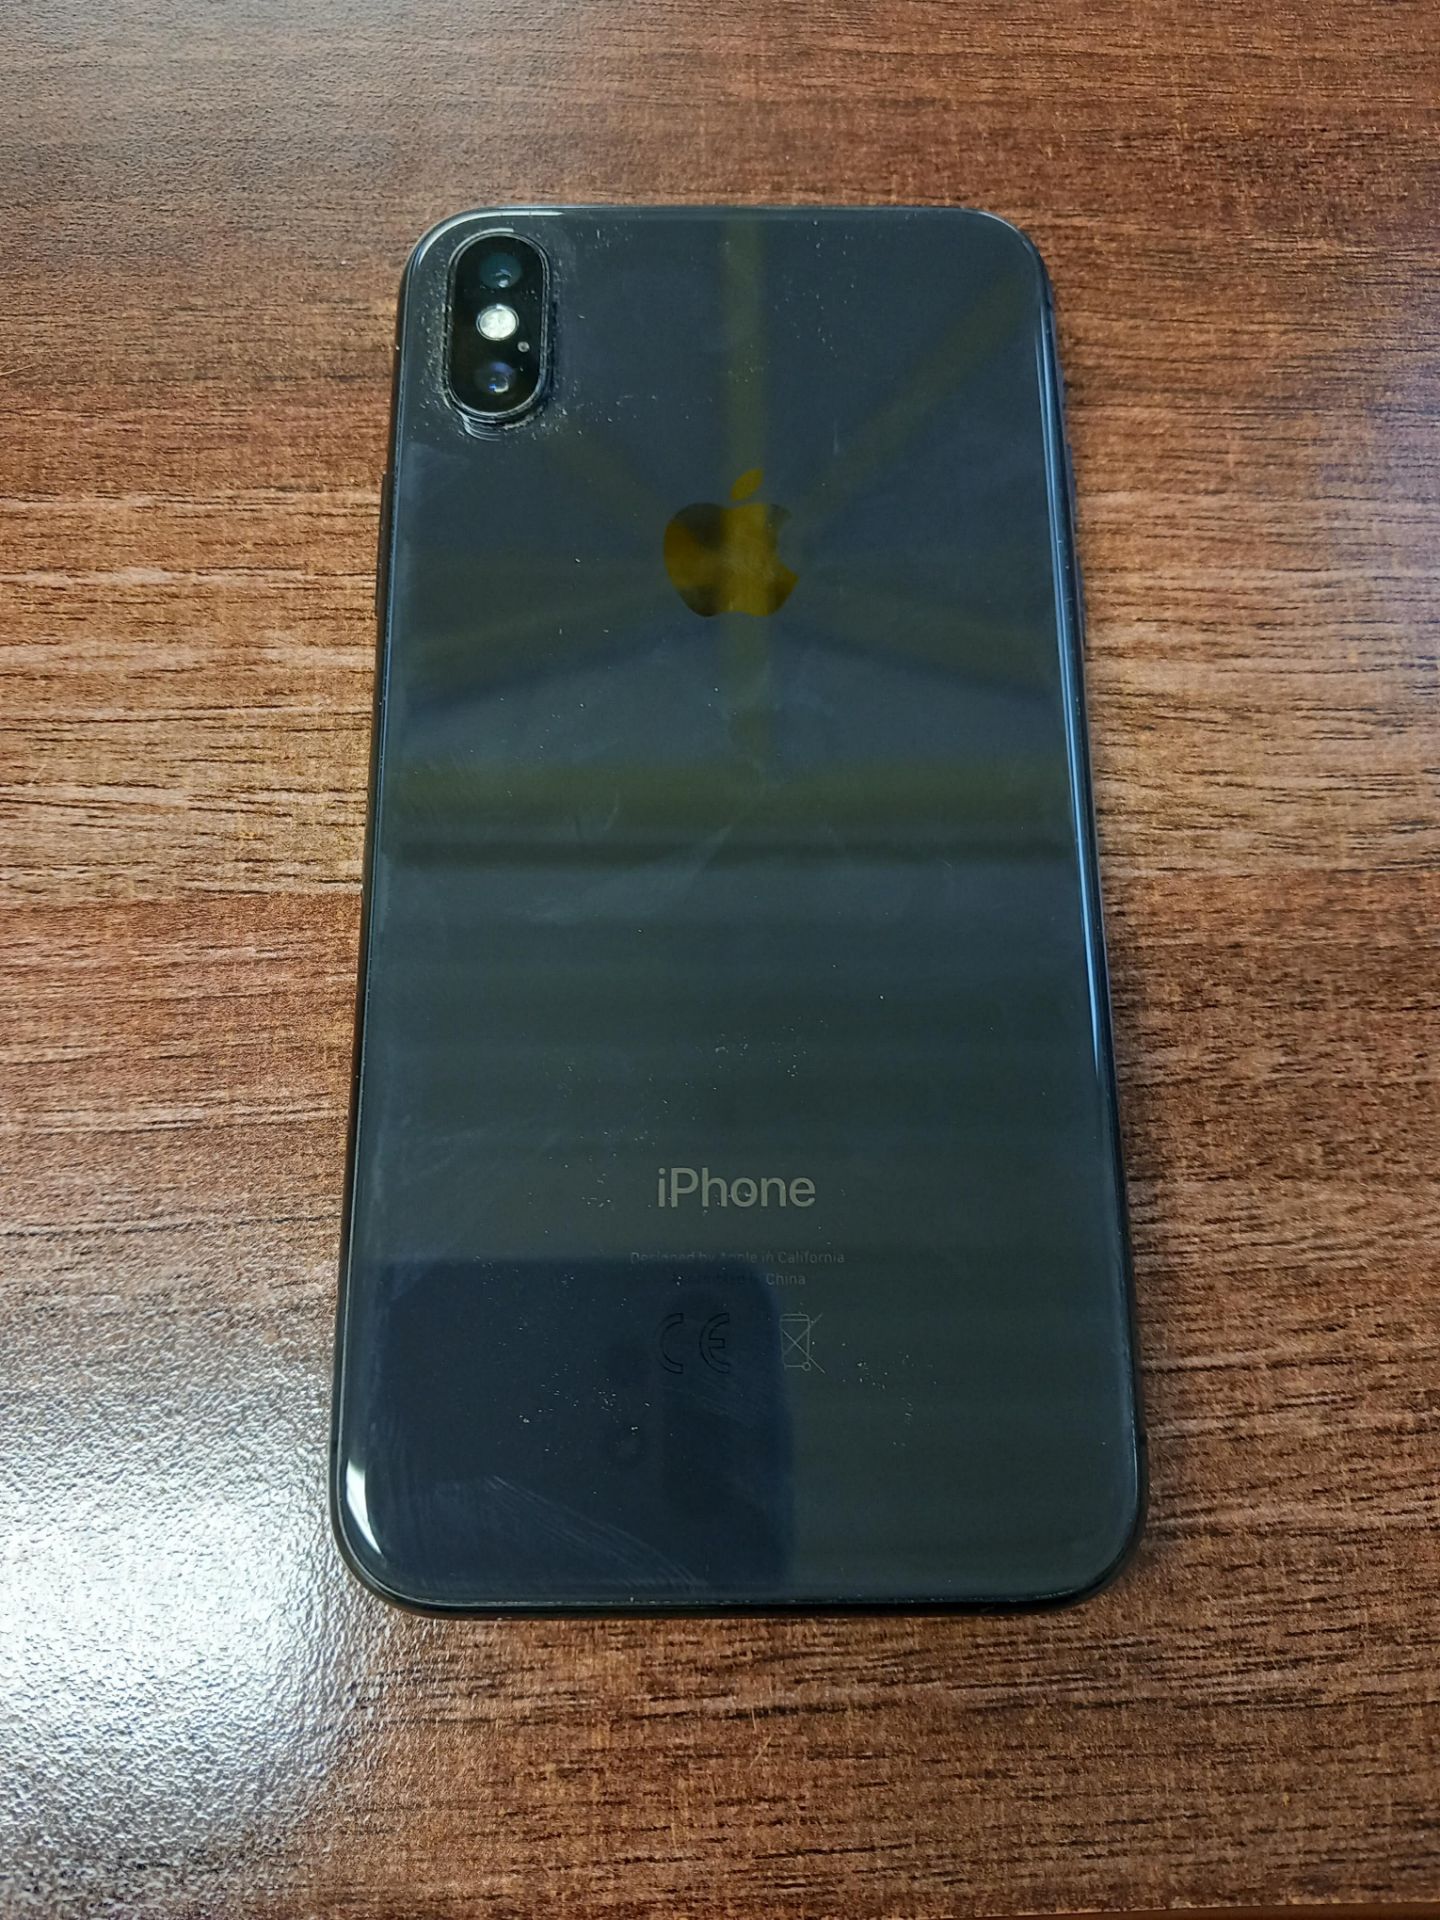 IPhone X. No charger - Image 3 of 3